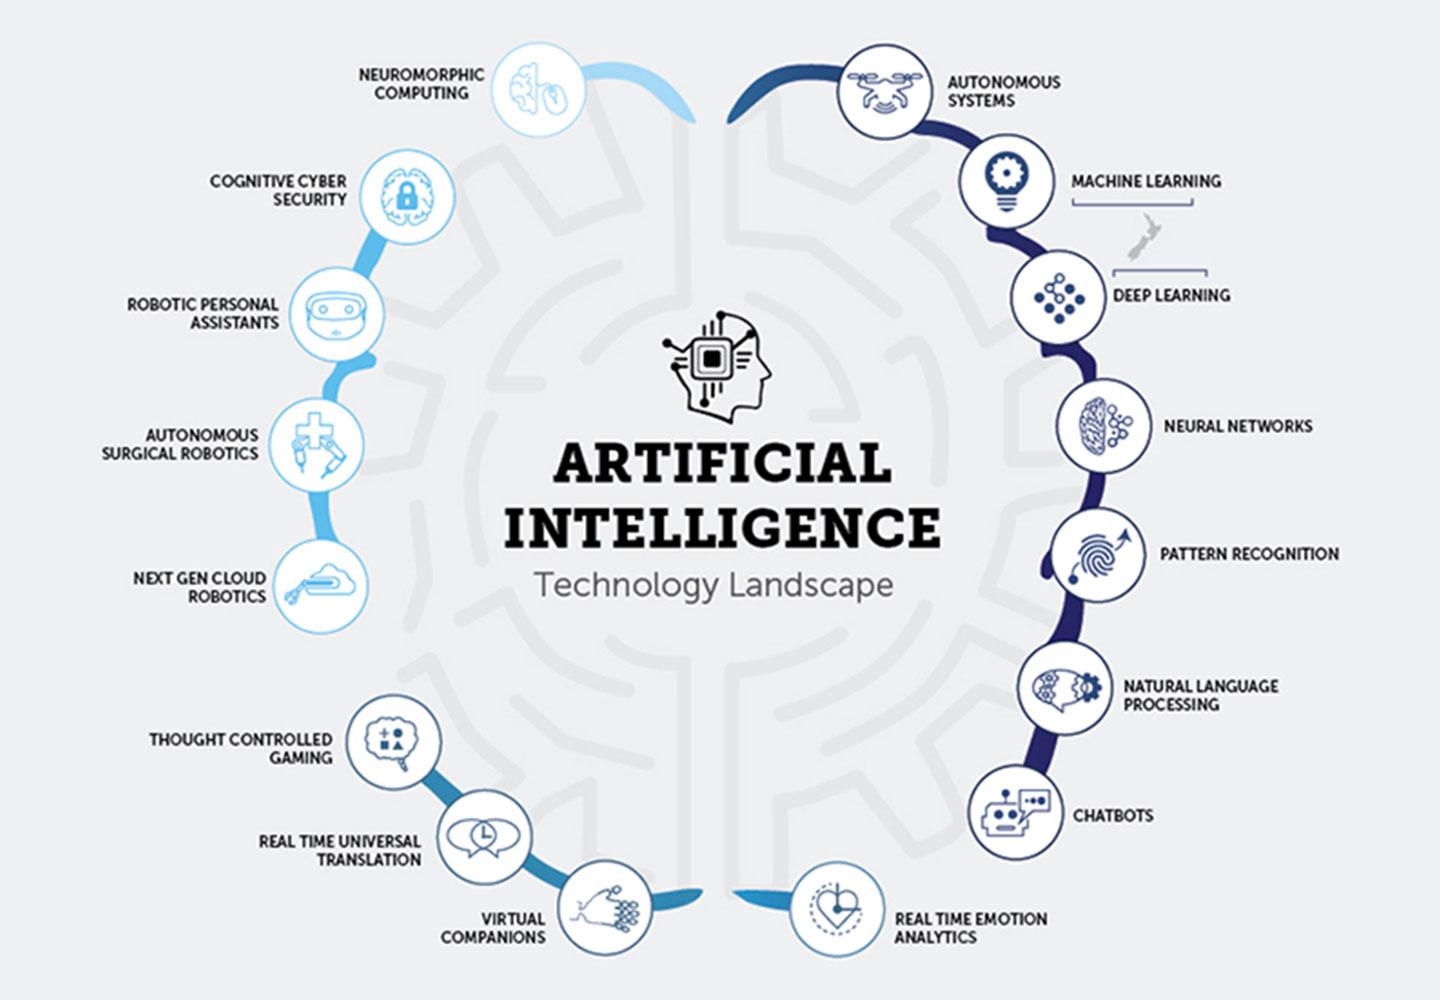 research topics related to artificial intelligence